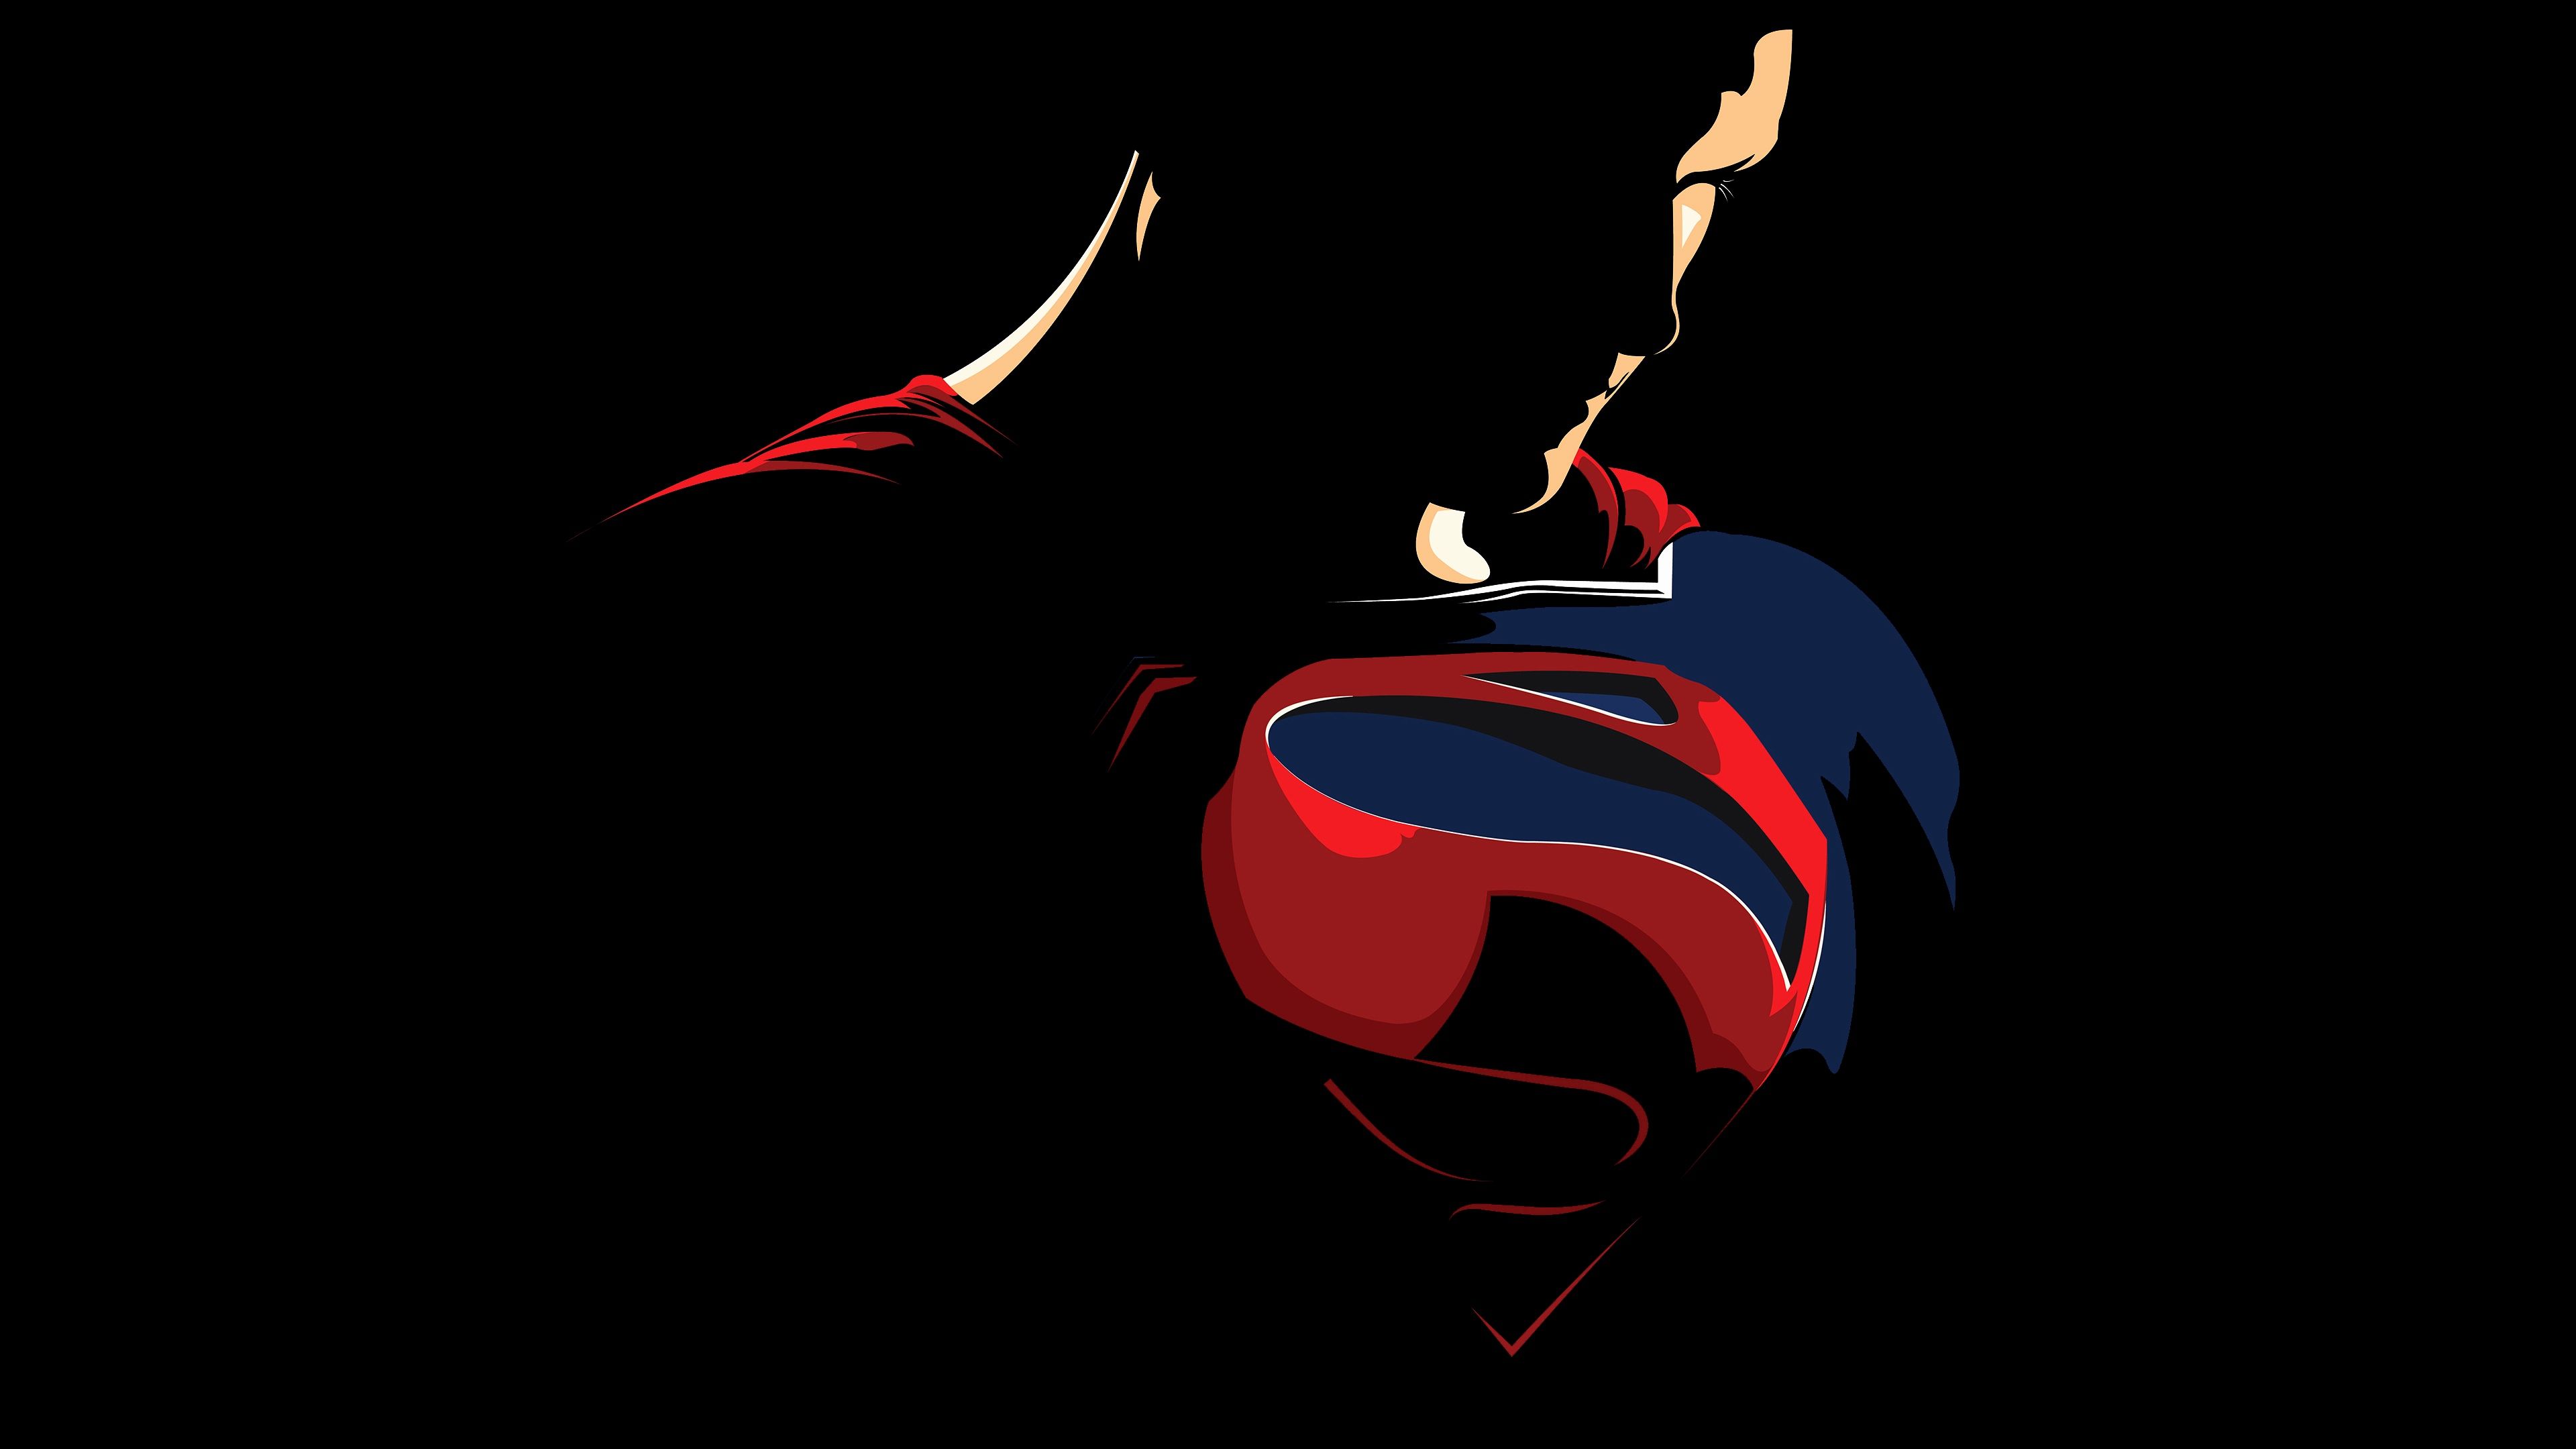 Superman Wallpaper 4k Lovely Superman Minimalism Logo 4k HD Superheroes 4k Wallpaper Background S and This Month of The Hudson